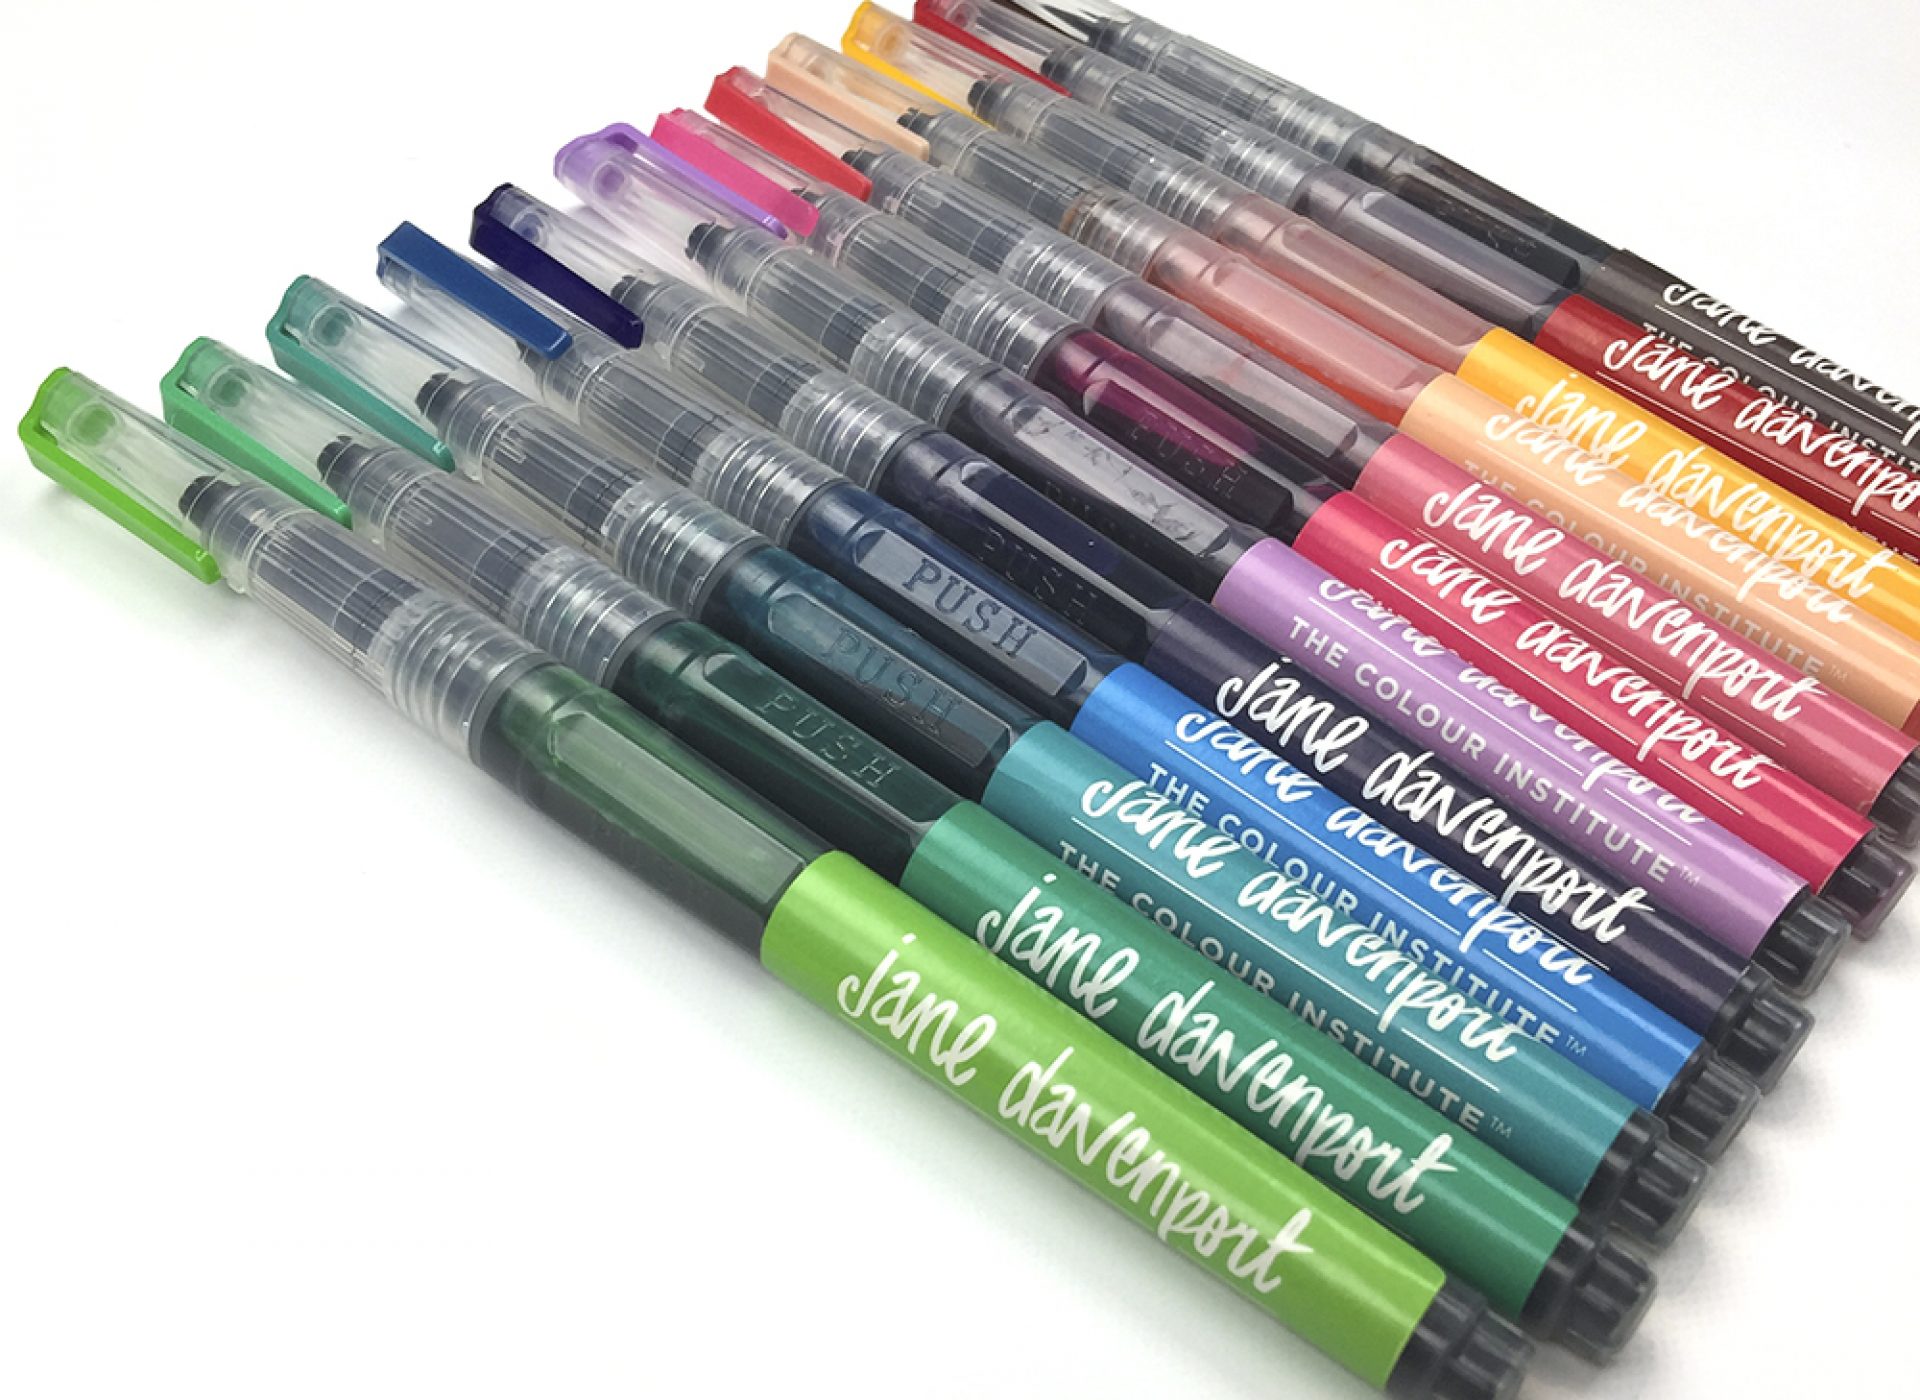 Staedtler Marsgraphic Duo Double-Ended Watercolor Brush Markers Set of 18